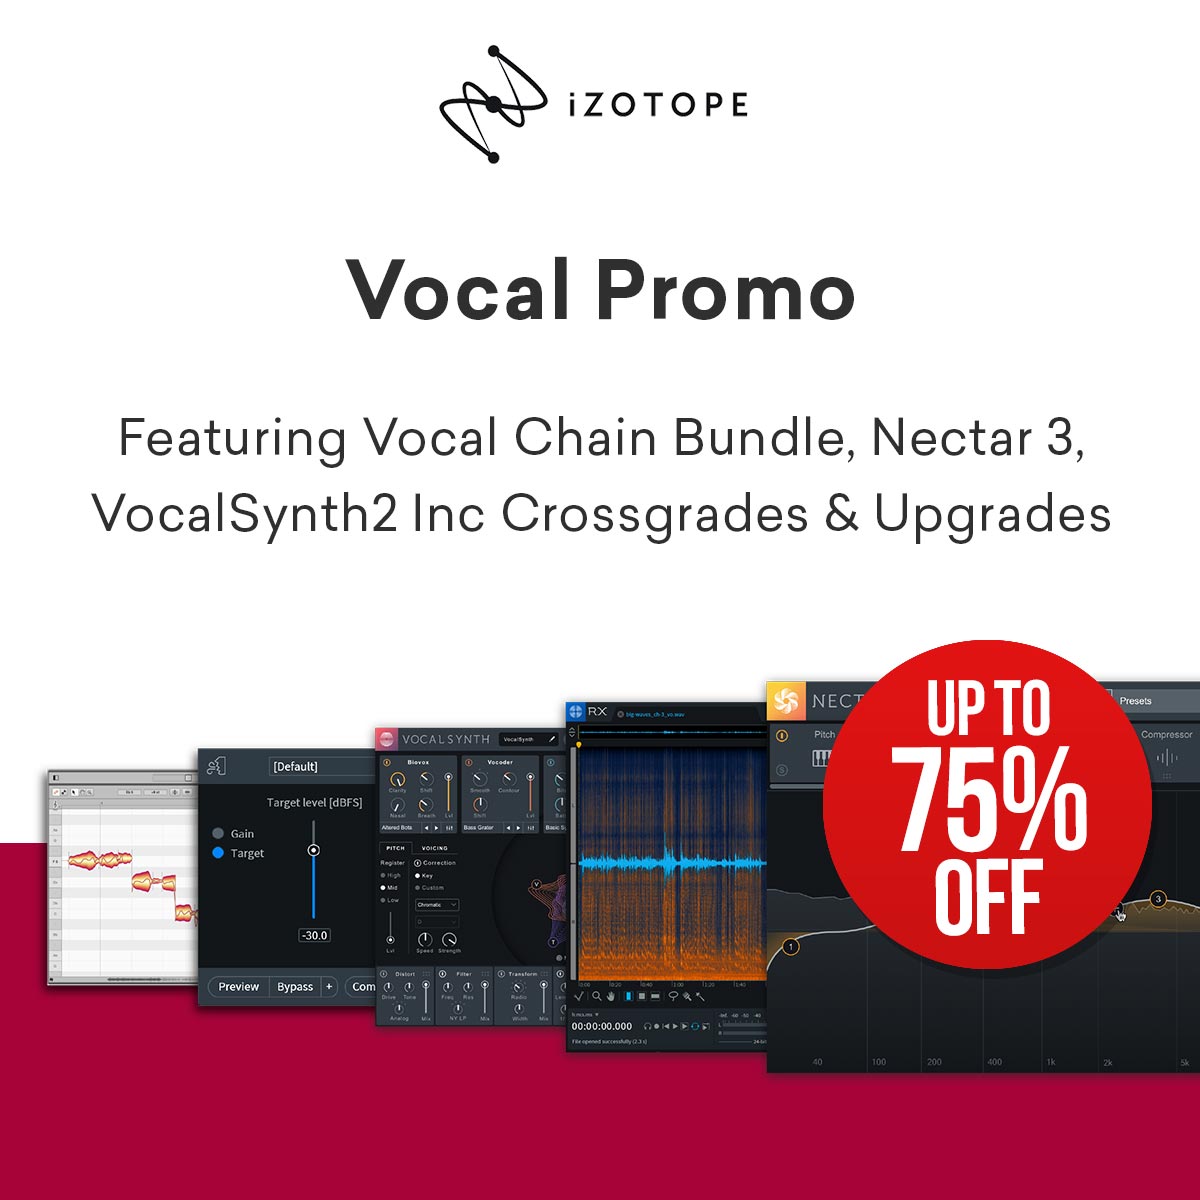 iZotope ボーカル処理系製品（Nectar3, VocalSynth2, RX Elements）が ...